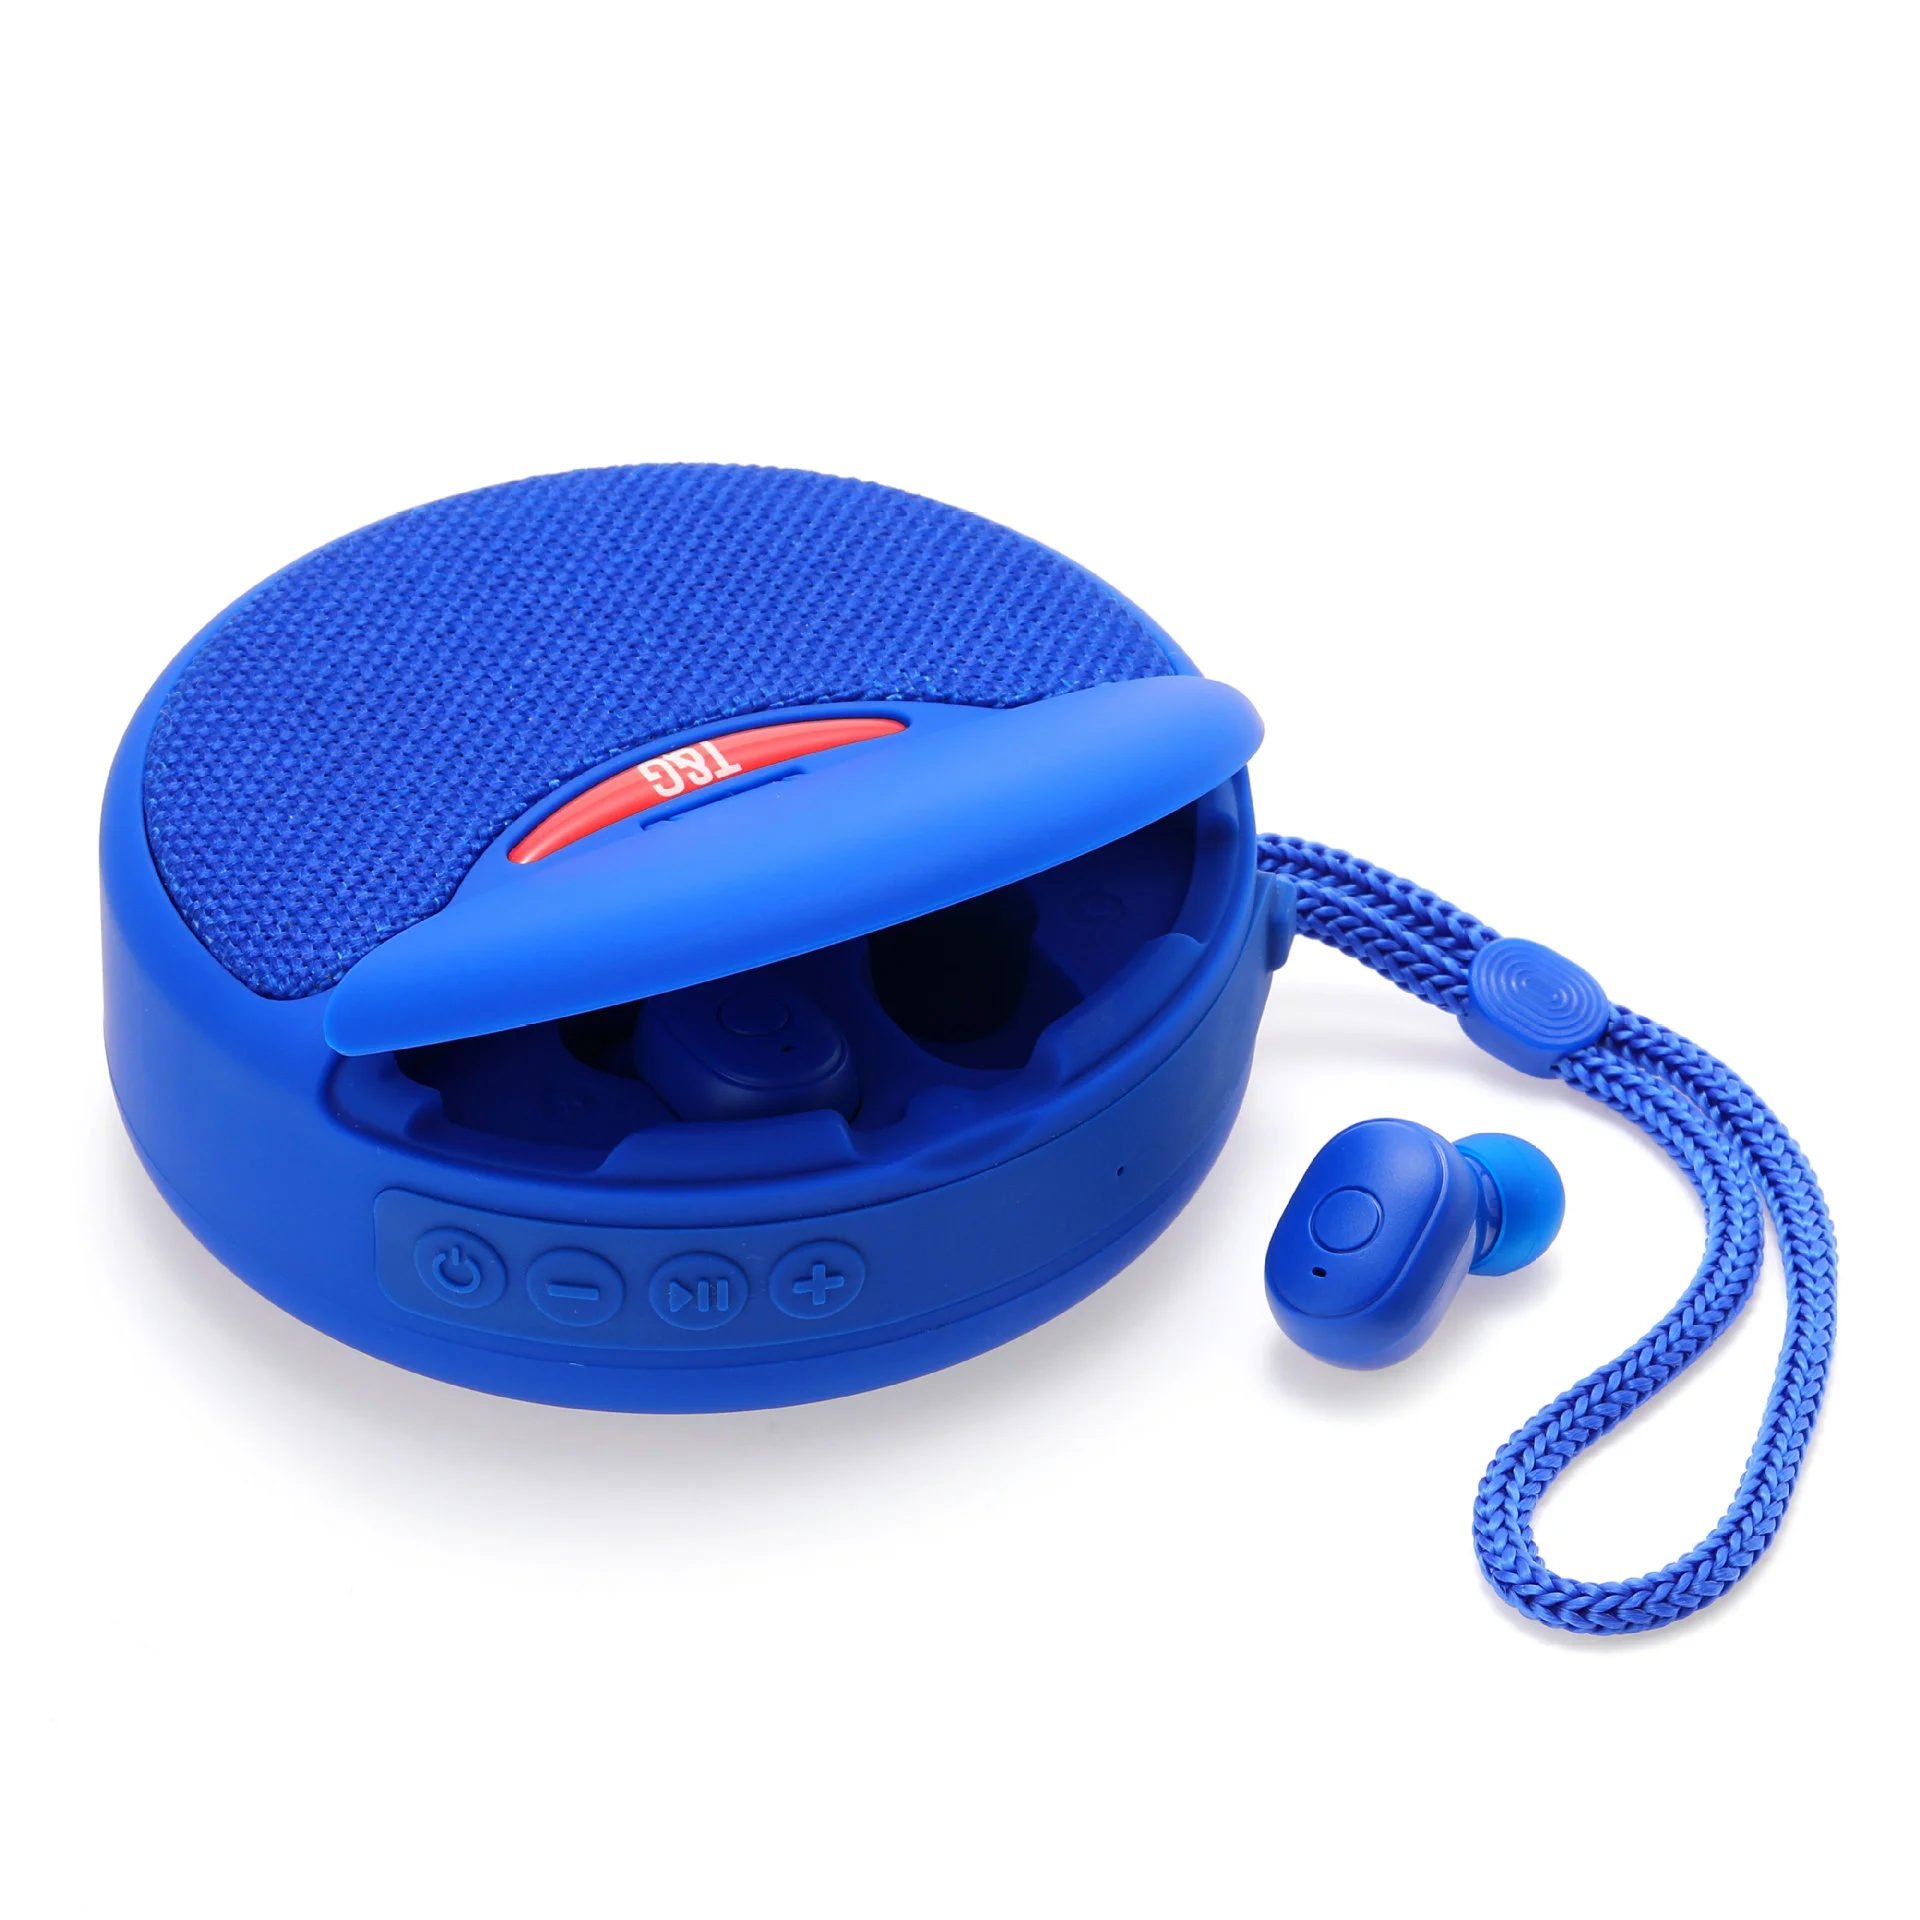 

Amazon TG808 Outdoor Sport Wireless Speaker TWS5.0 Blue tooth Wireless Headphone Earbud, As the picture showed